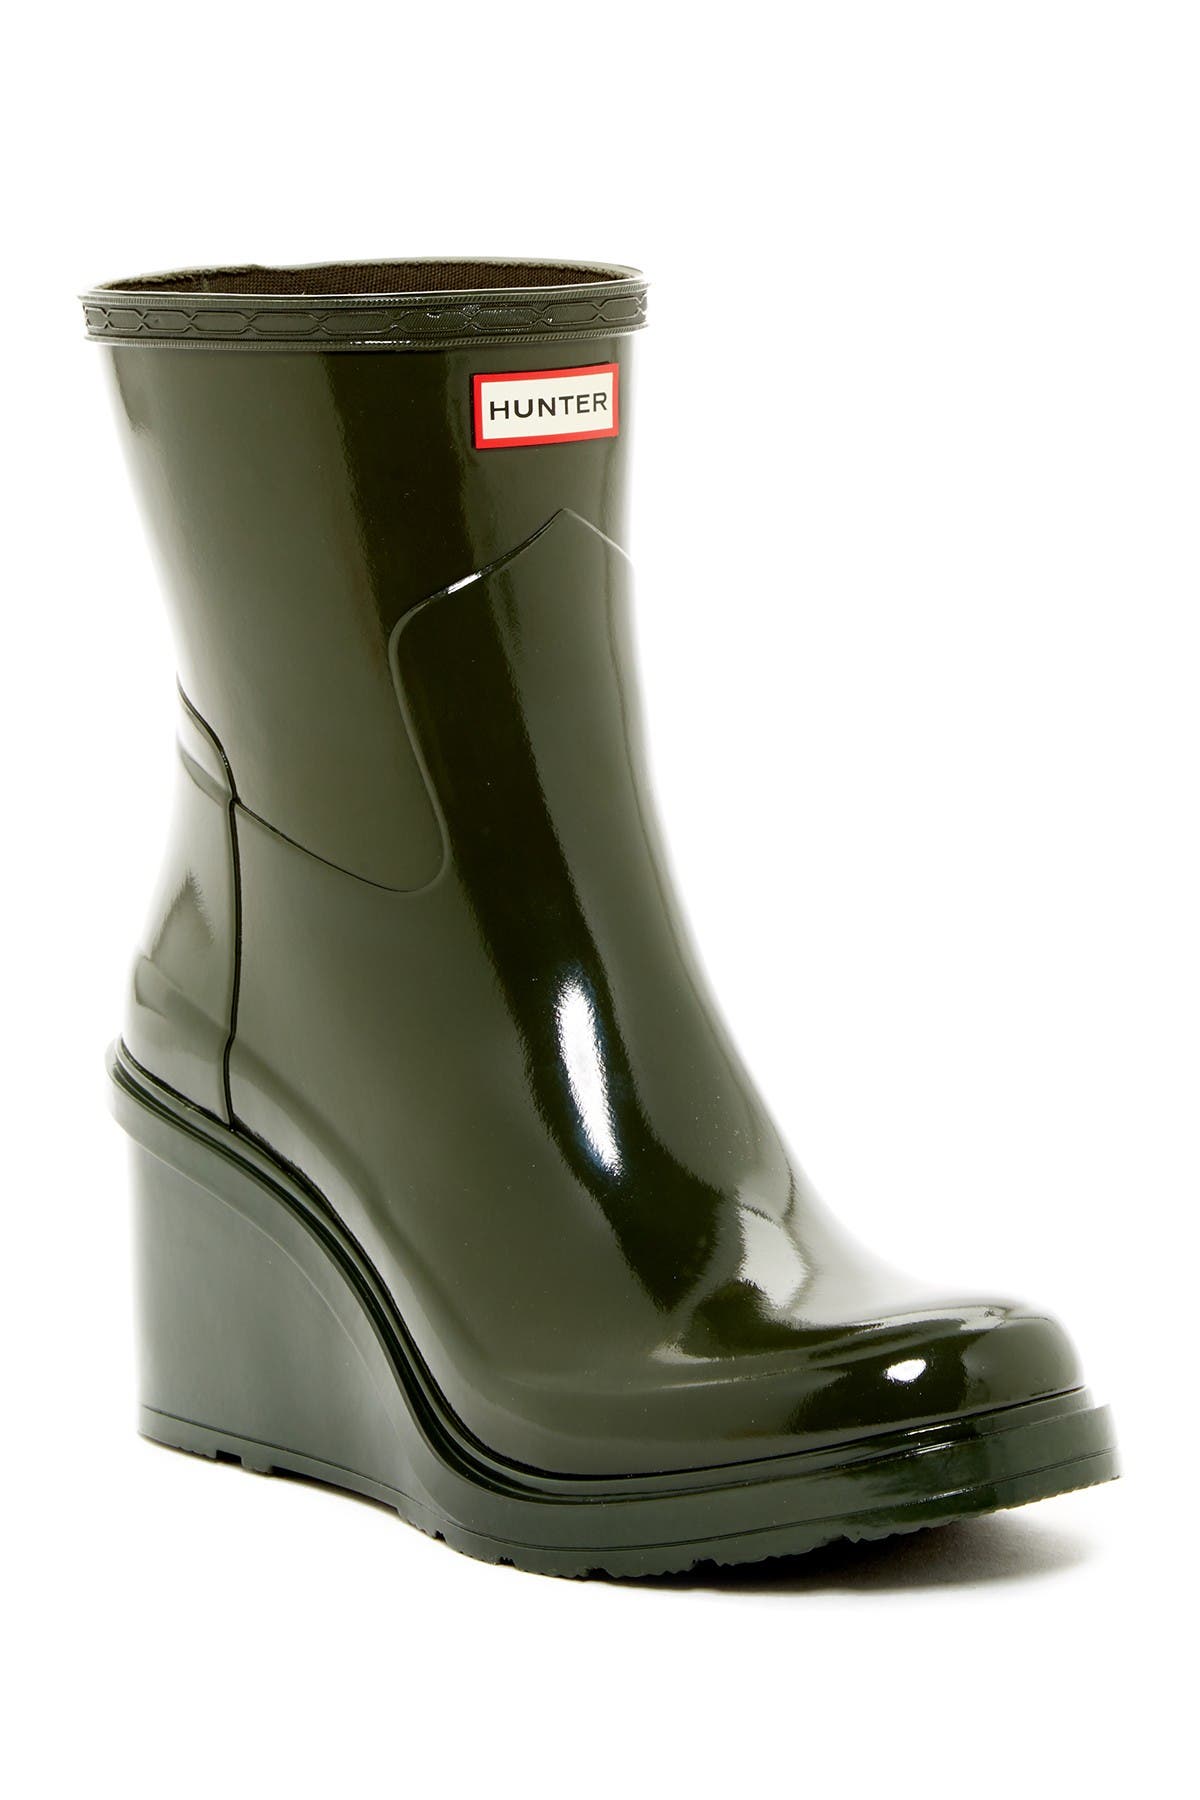 hunter wedge boots